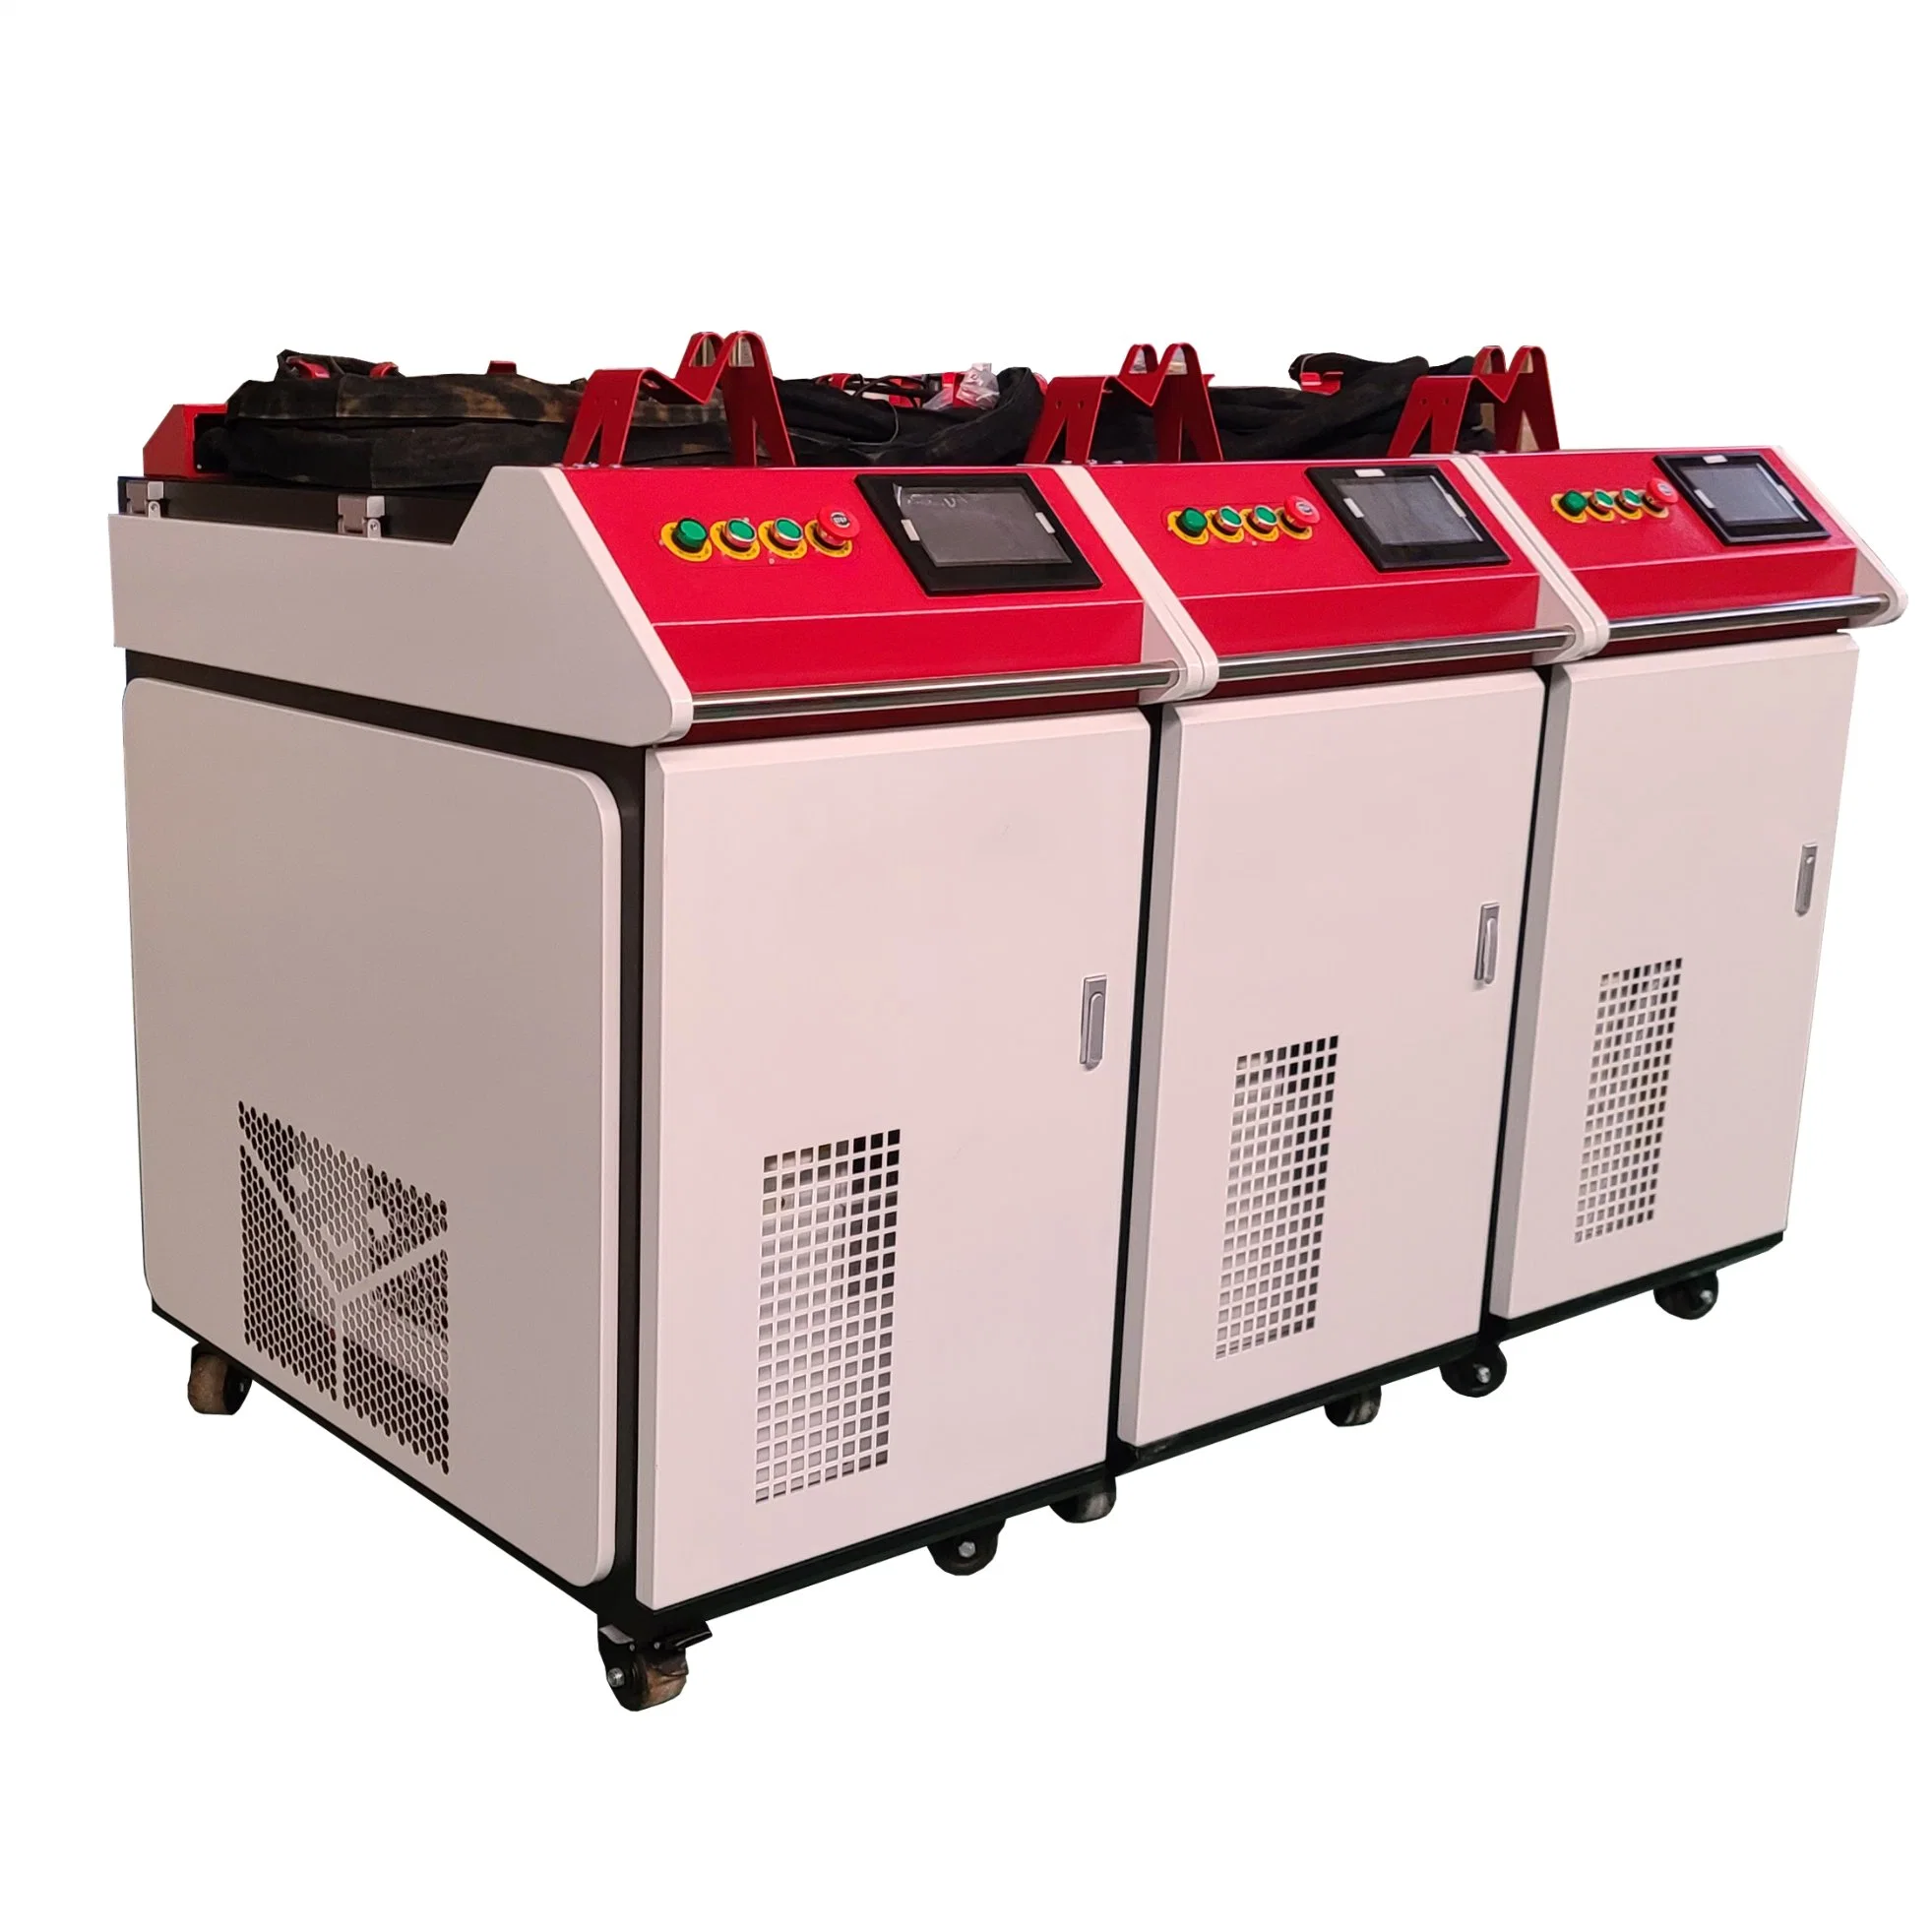 Portable Handled Laser Cleaning Machine/ Laser Fiber Cleaner Laser Rust Removal with Raycus Jpt Laser Source